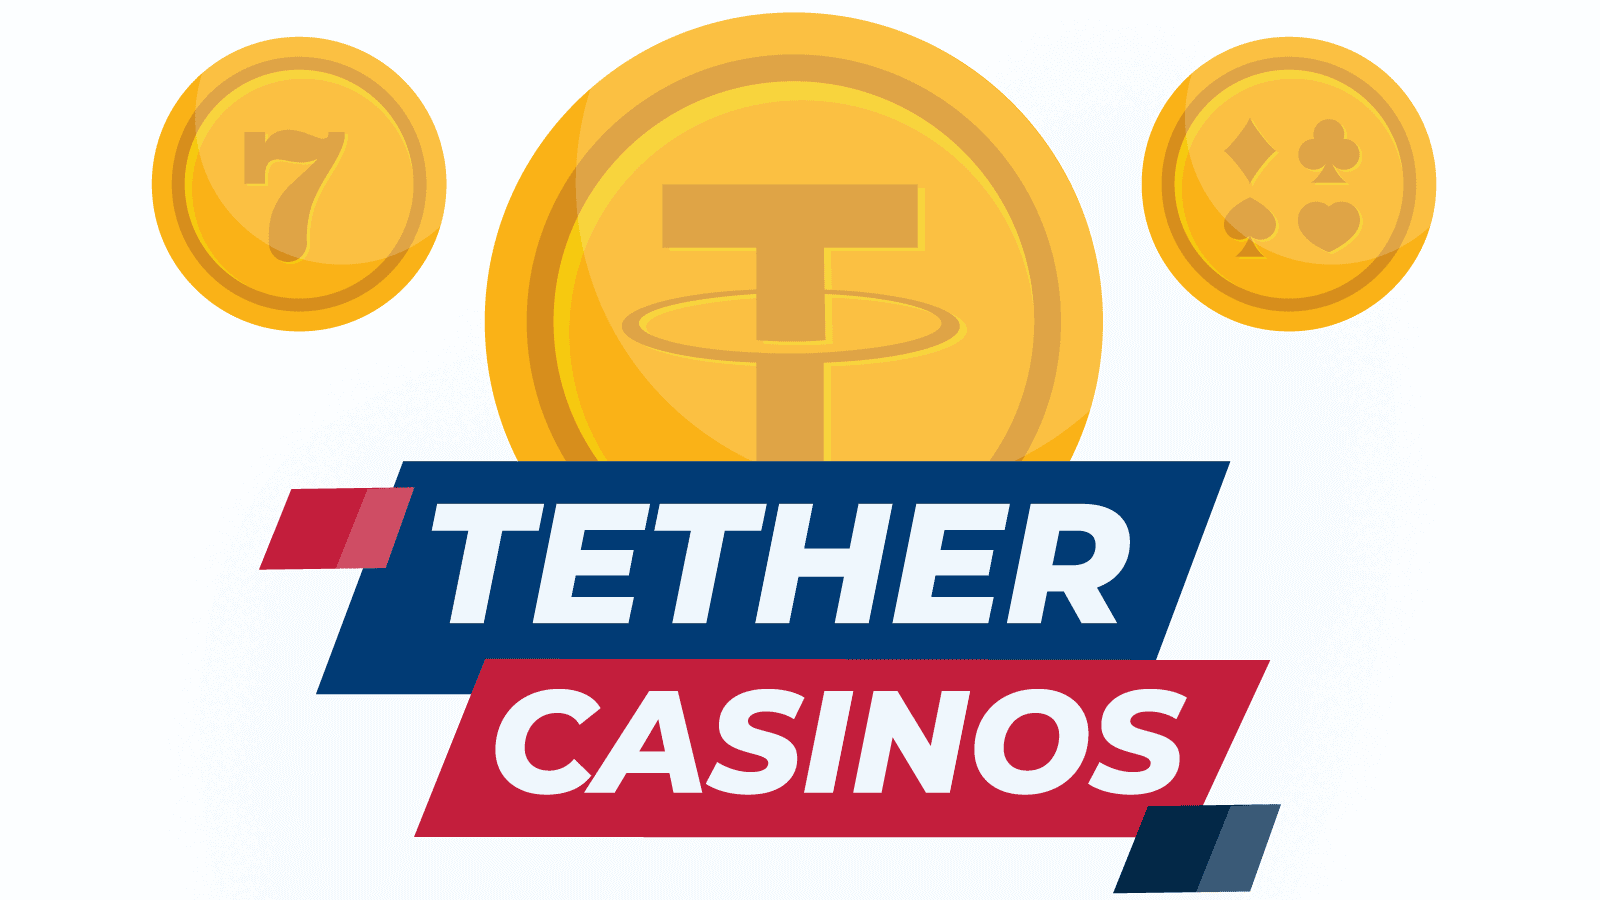 Want A Thriving Business? Focus On casinos usdt!